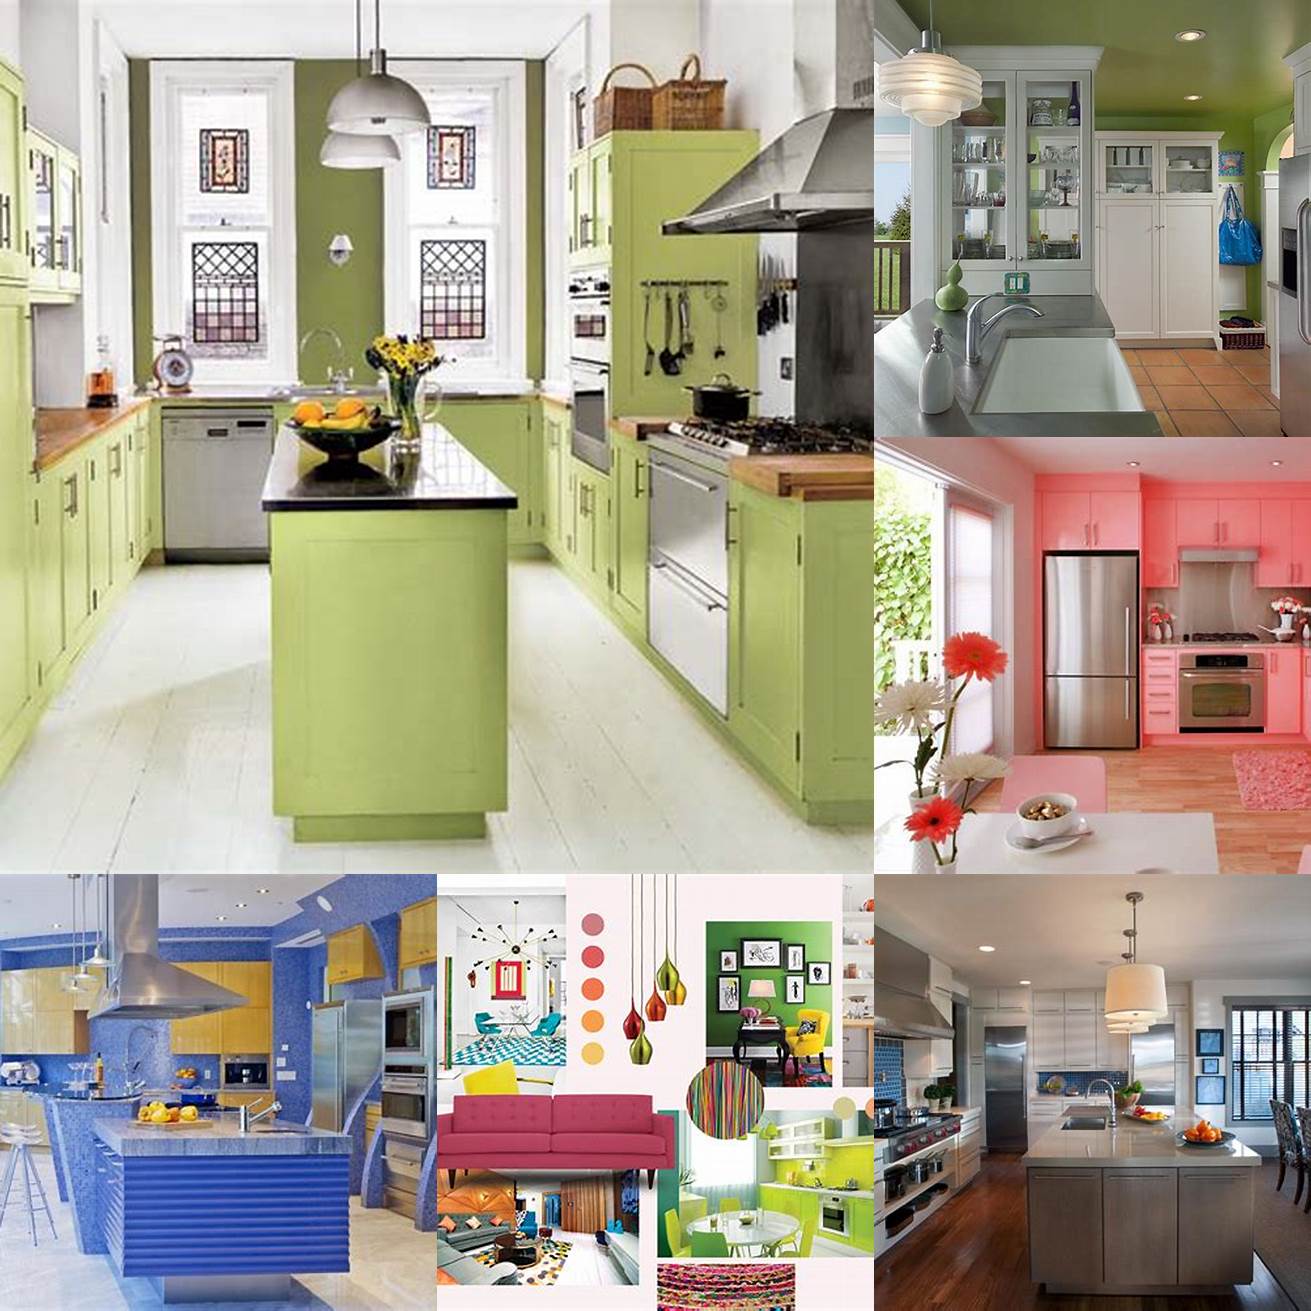 Bright colors such as red blue and green add a playful and vibrant touch to your kitchen